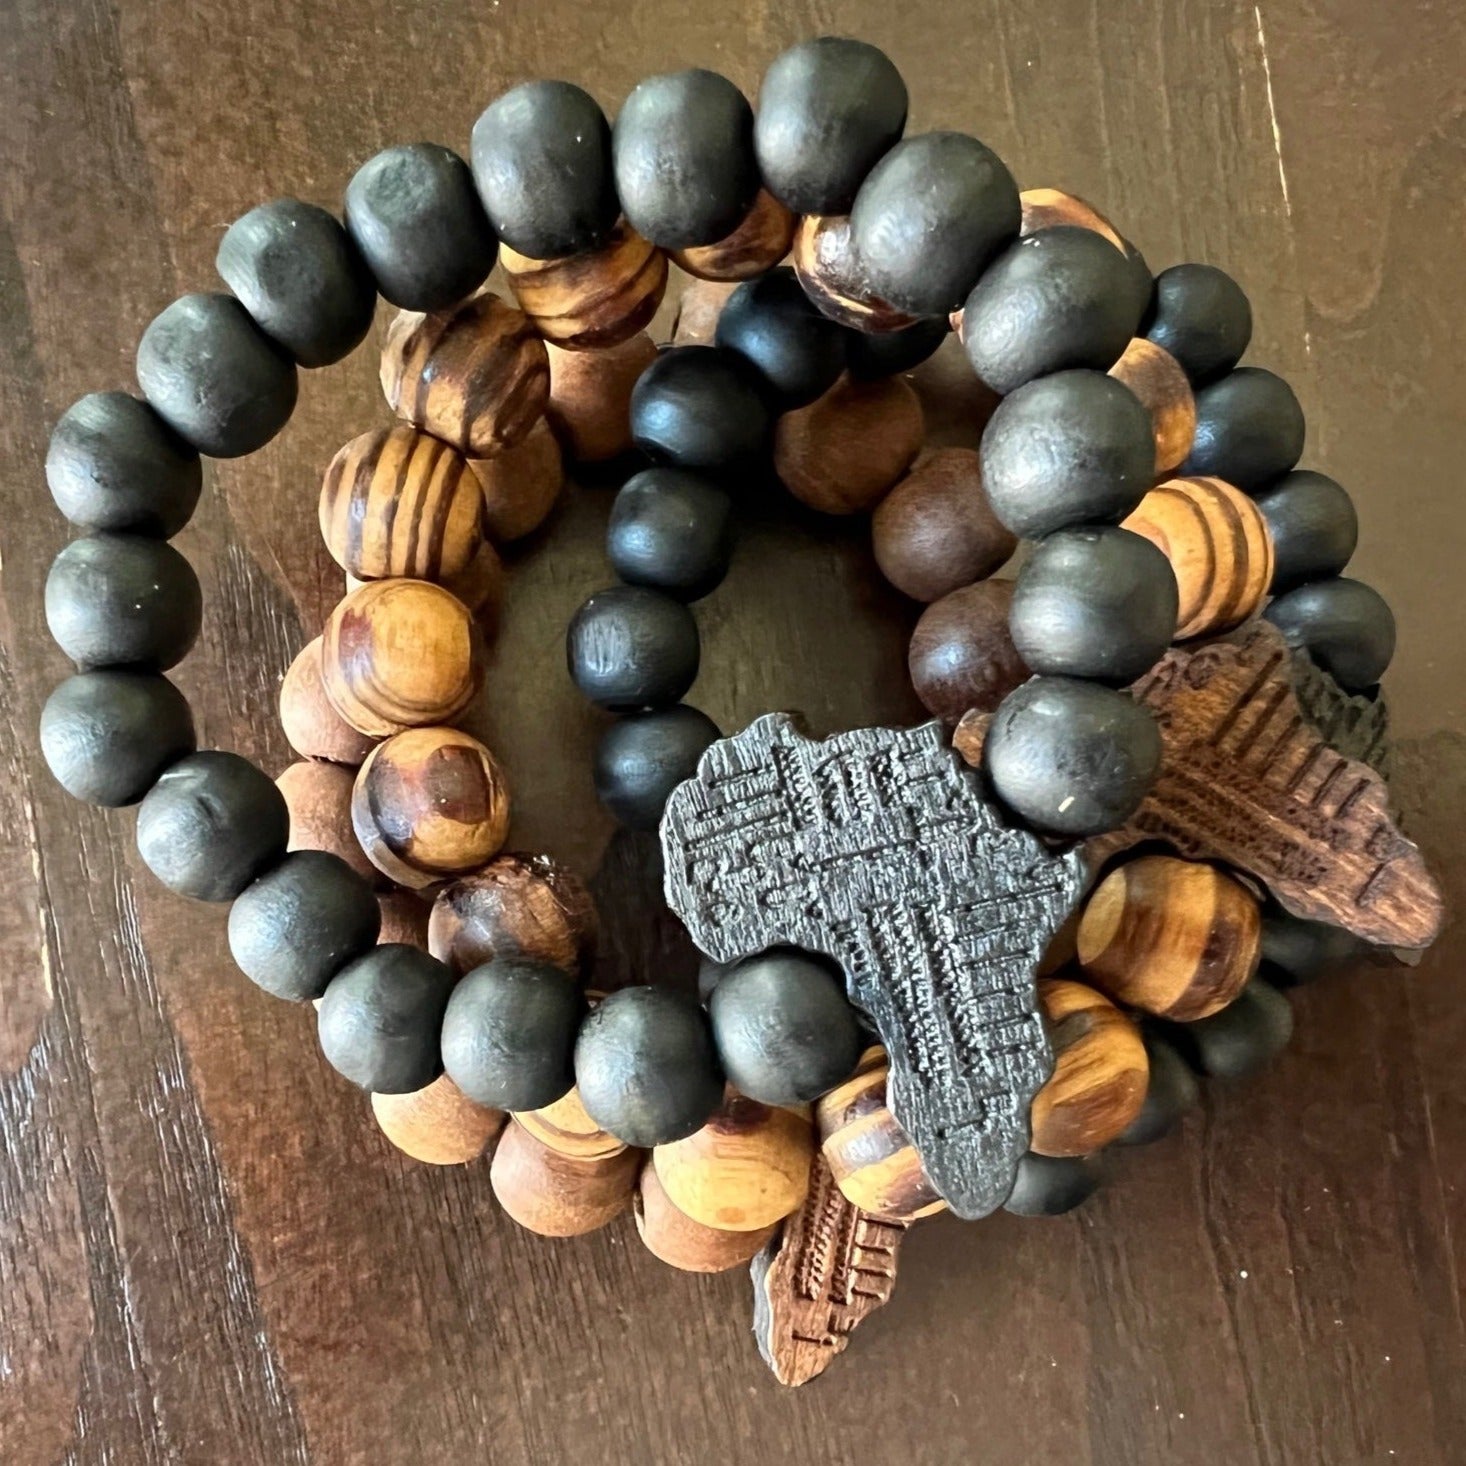 Buy Bohemian Wood Beaded Bracelets for Women Natural Stone Boho Stretch Wooden  Bracelet Set Religious Charm Multilayered Bead Strand Elastic Stackable  Bracelets Handmade Jewelry Gifts for Men and Women, no gemstone at